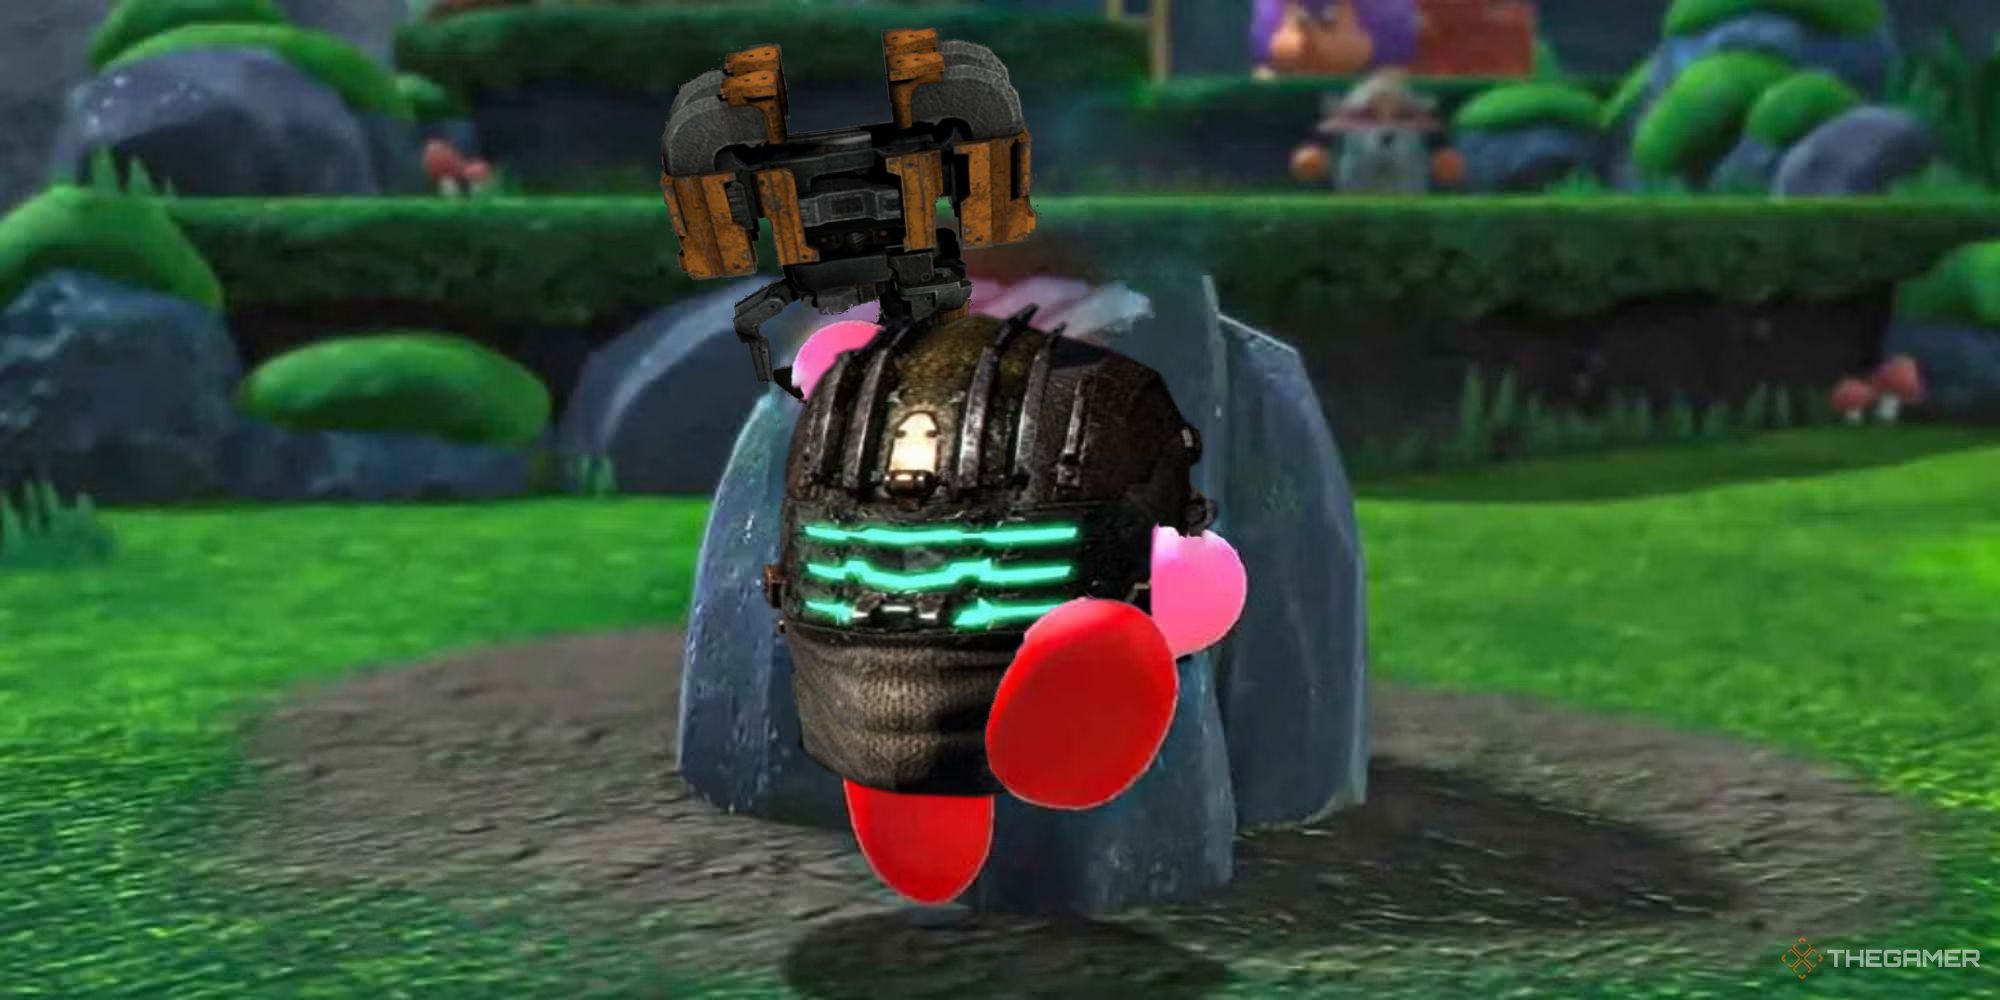 Kirby with the Dead Space Plasma Cutter